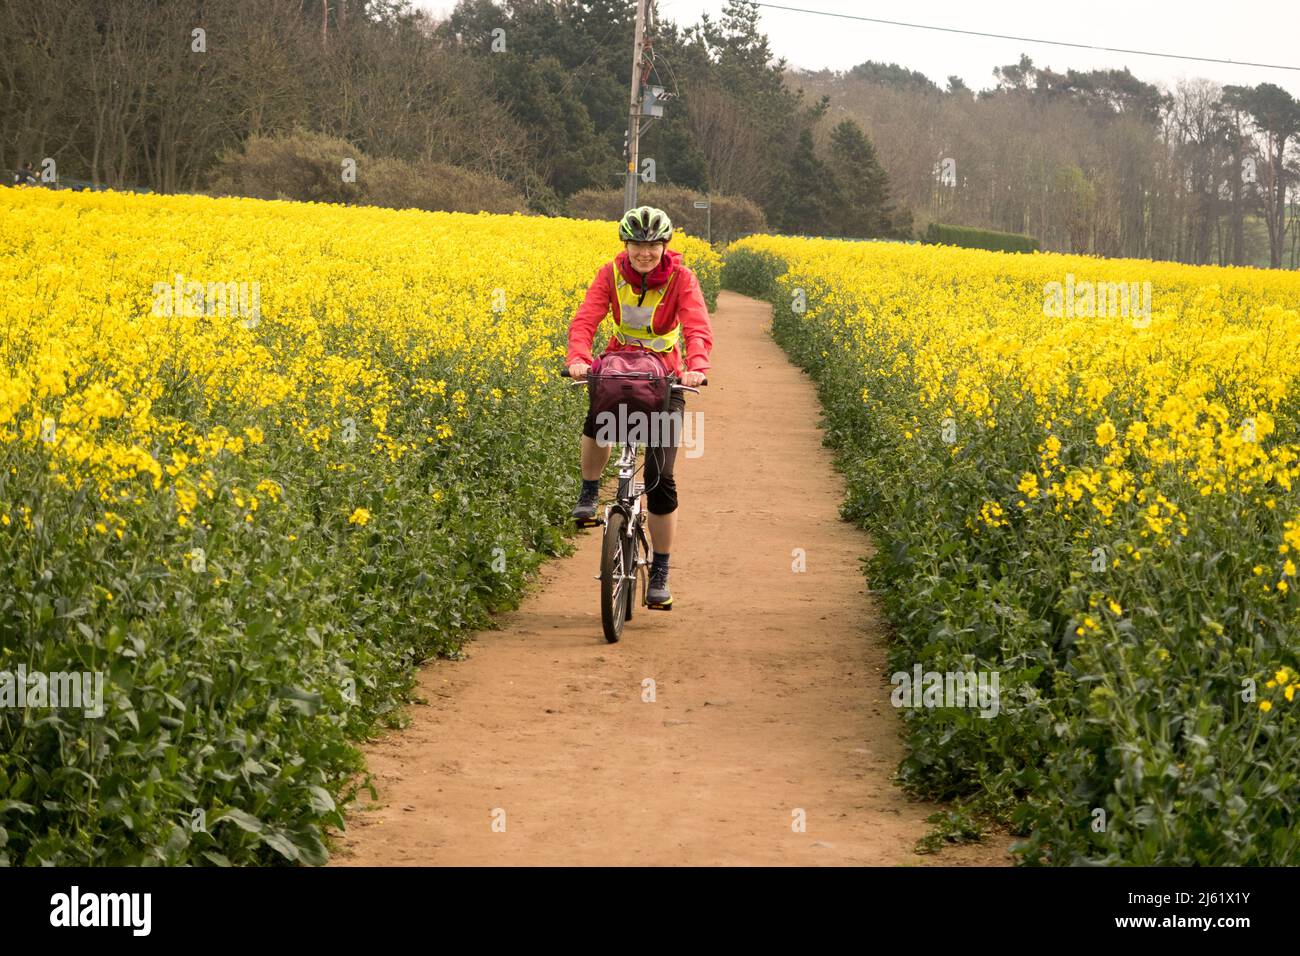 A woman cycling through a a field of rapeseed plants Stock Photo